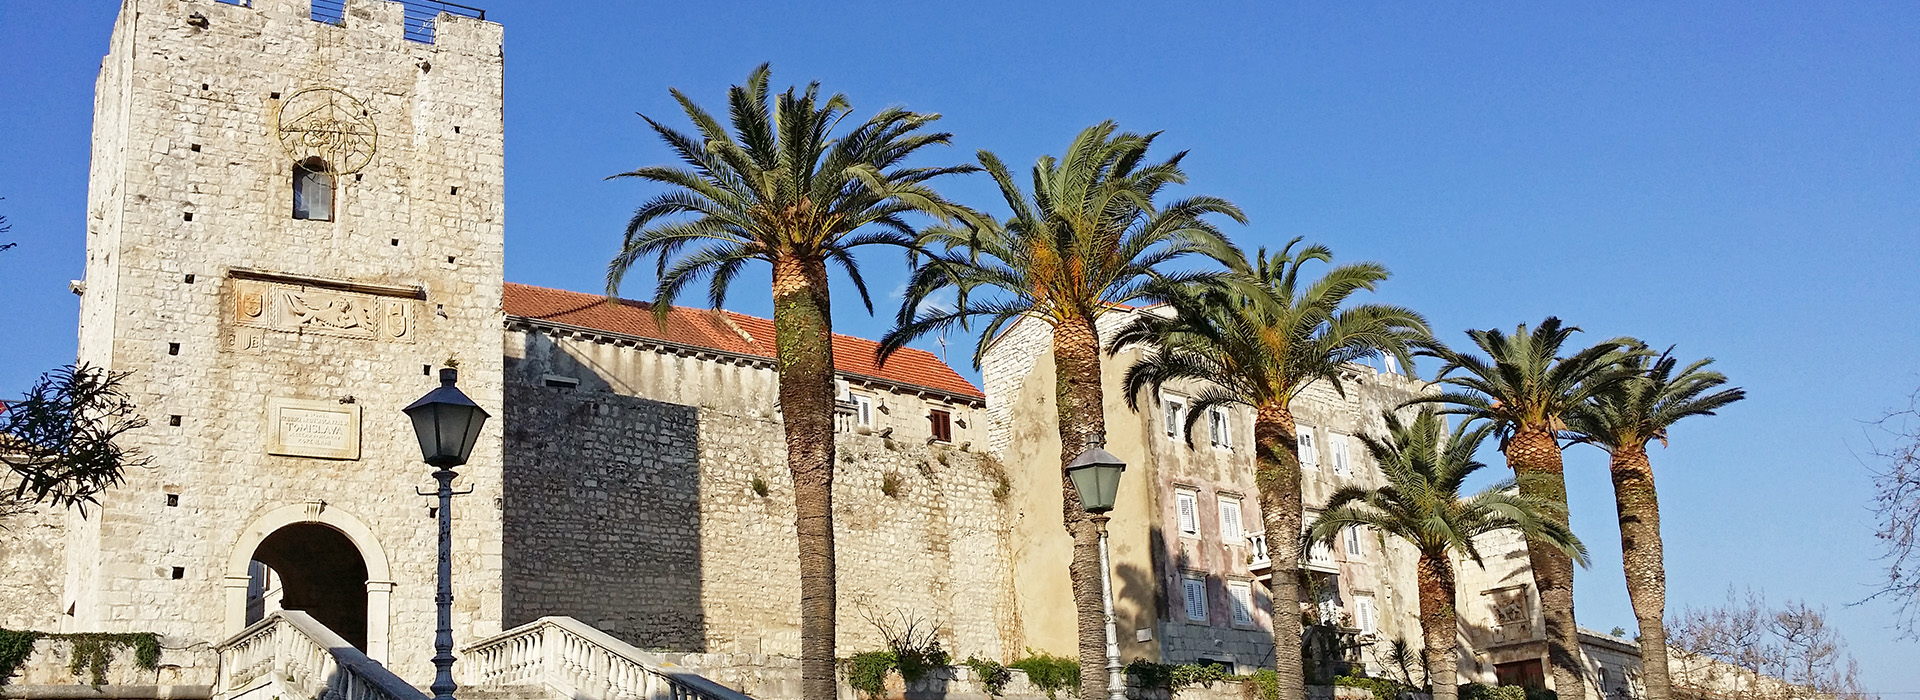 Montenegro and Croatia Self-Guided Walking Holiday - Korcula medievel town